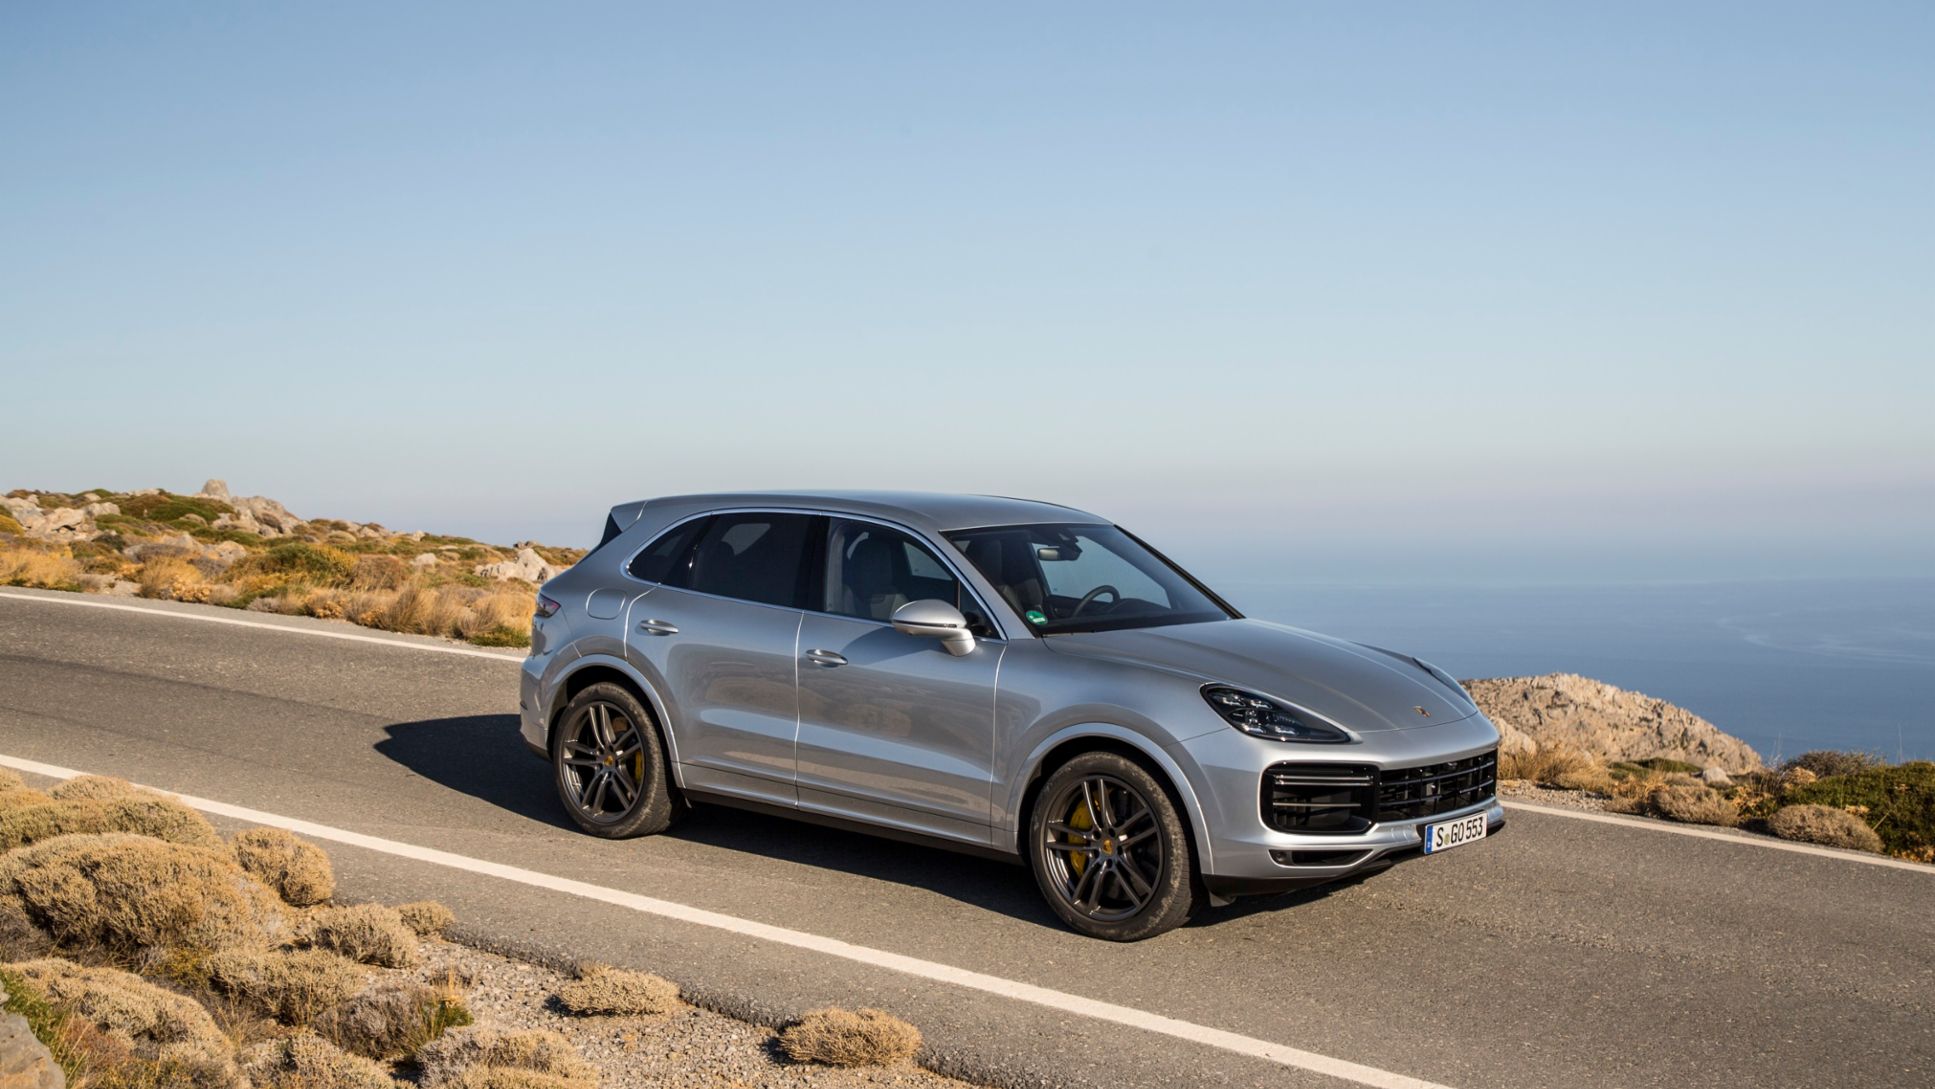 Sales of the redesigned Cayenne were nine times higher in August compared to a year earlier, 2019, PCNA